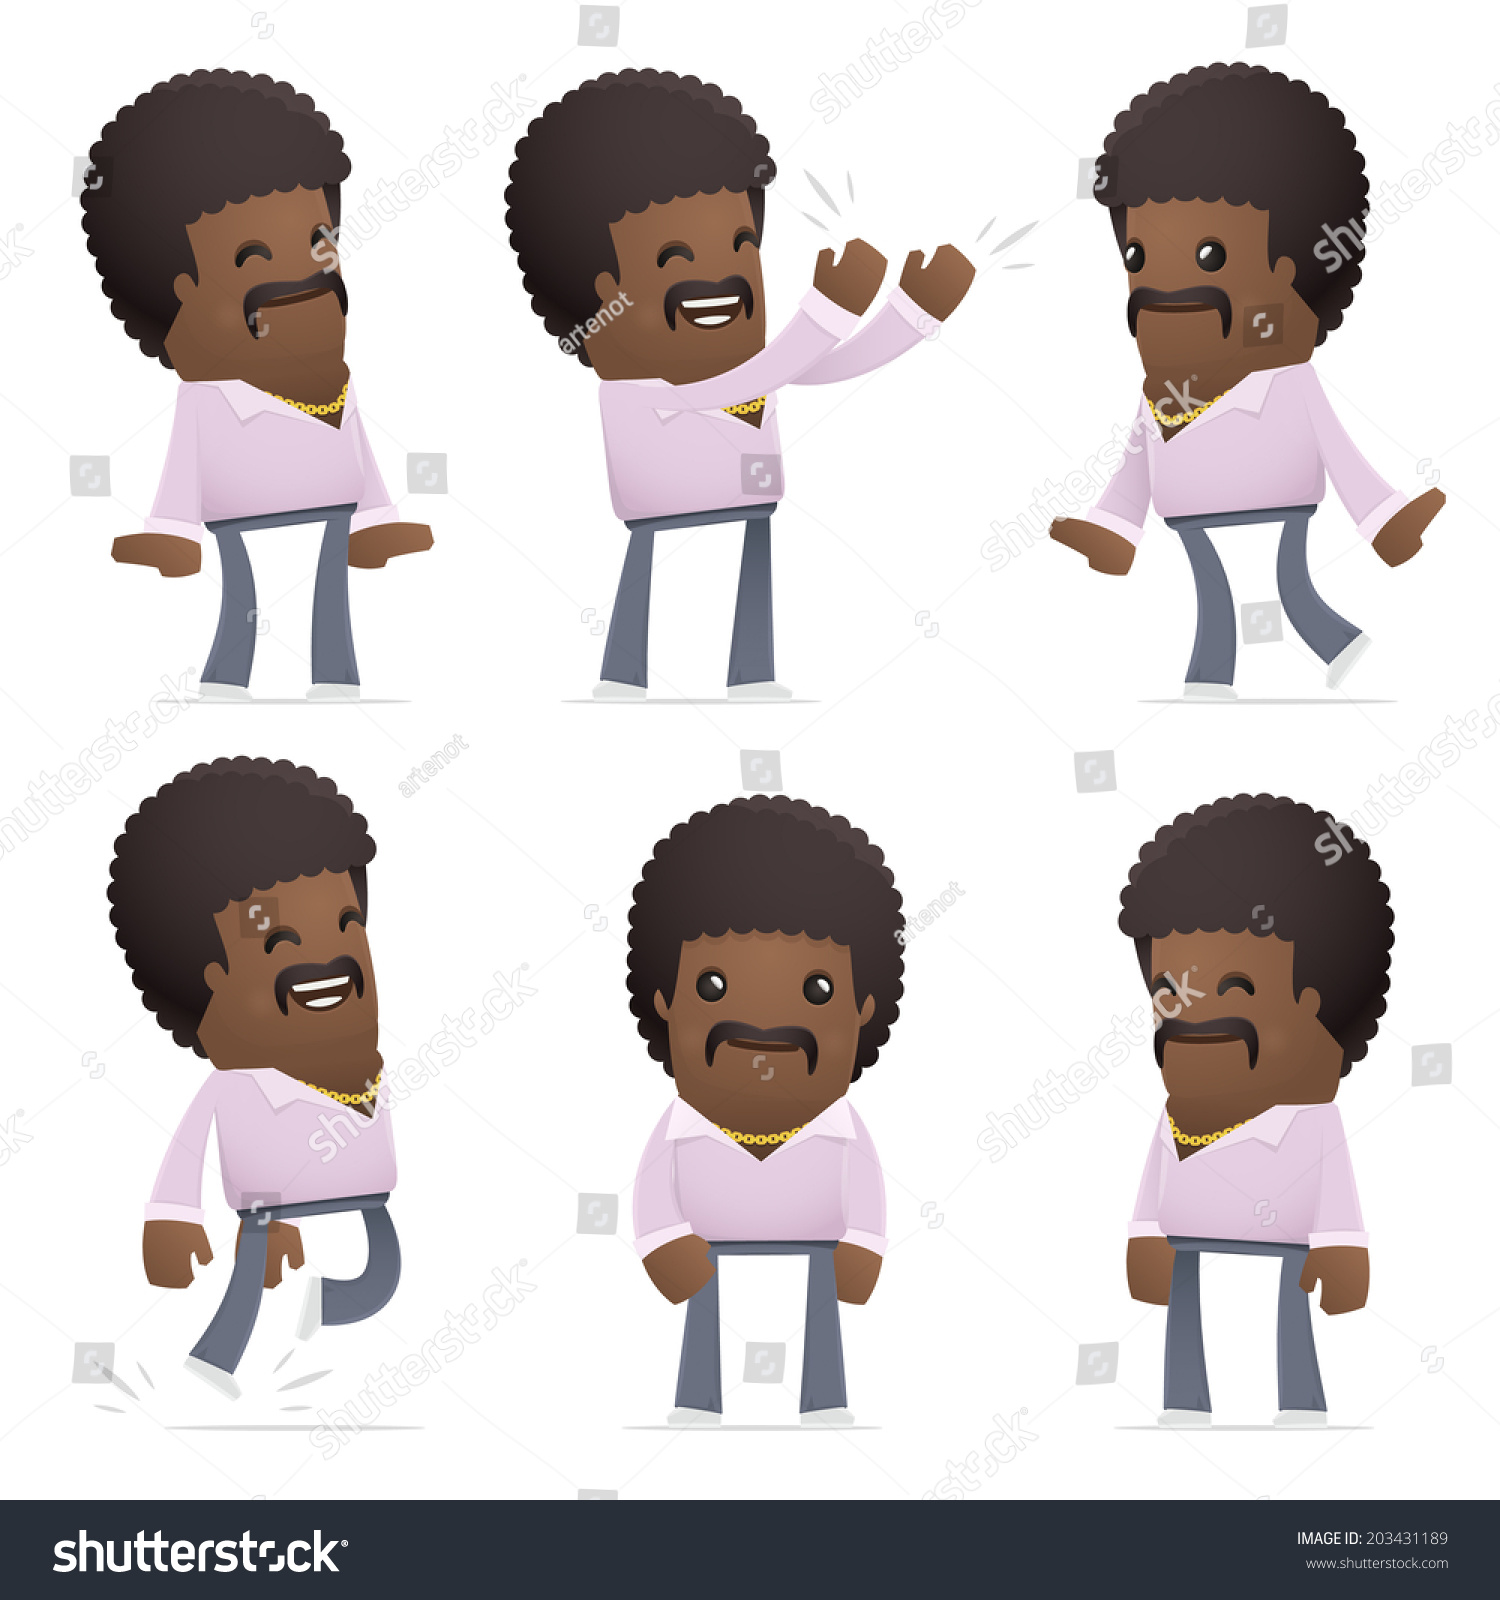 SVG of set of disco man character in different interactive  poses svg